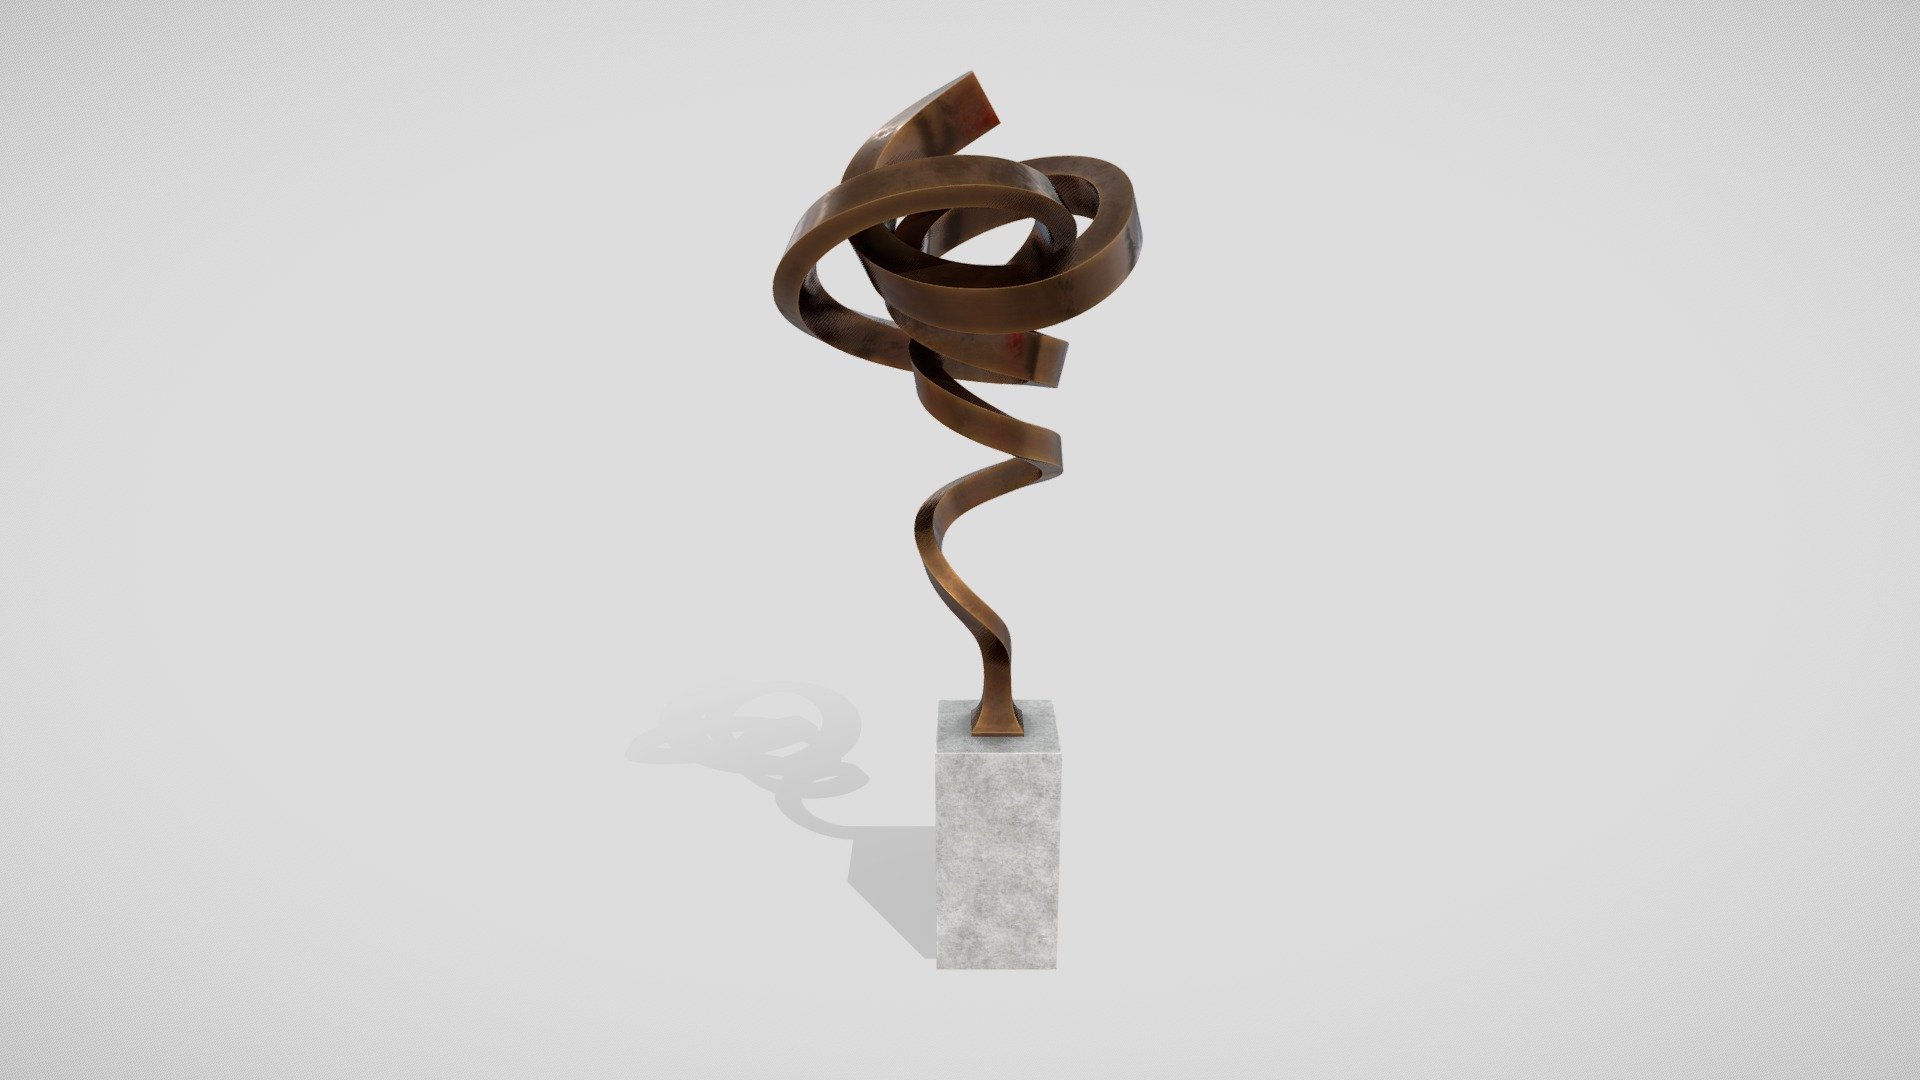 Modern Decorative Abstract Bronze Art Sculpture 31 Unwrapped with the full pack of textures and materials prepared for V-ray and Corona renderers.

Dimensions: 105,2 x 122,4 x H 317,9 cm

Material: Bronze, Concrete

Textures: 8k (8192x8192) - Modern Abstract Bronze Art Sculpture 31 - 3D model by gogoskilla 3d model